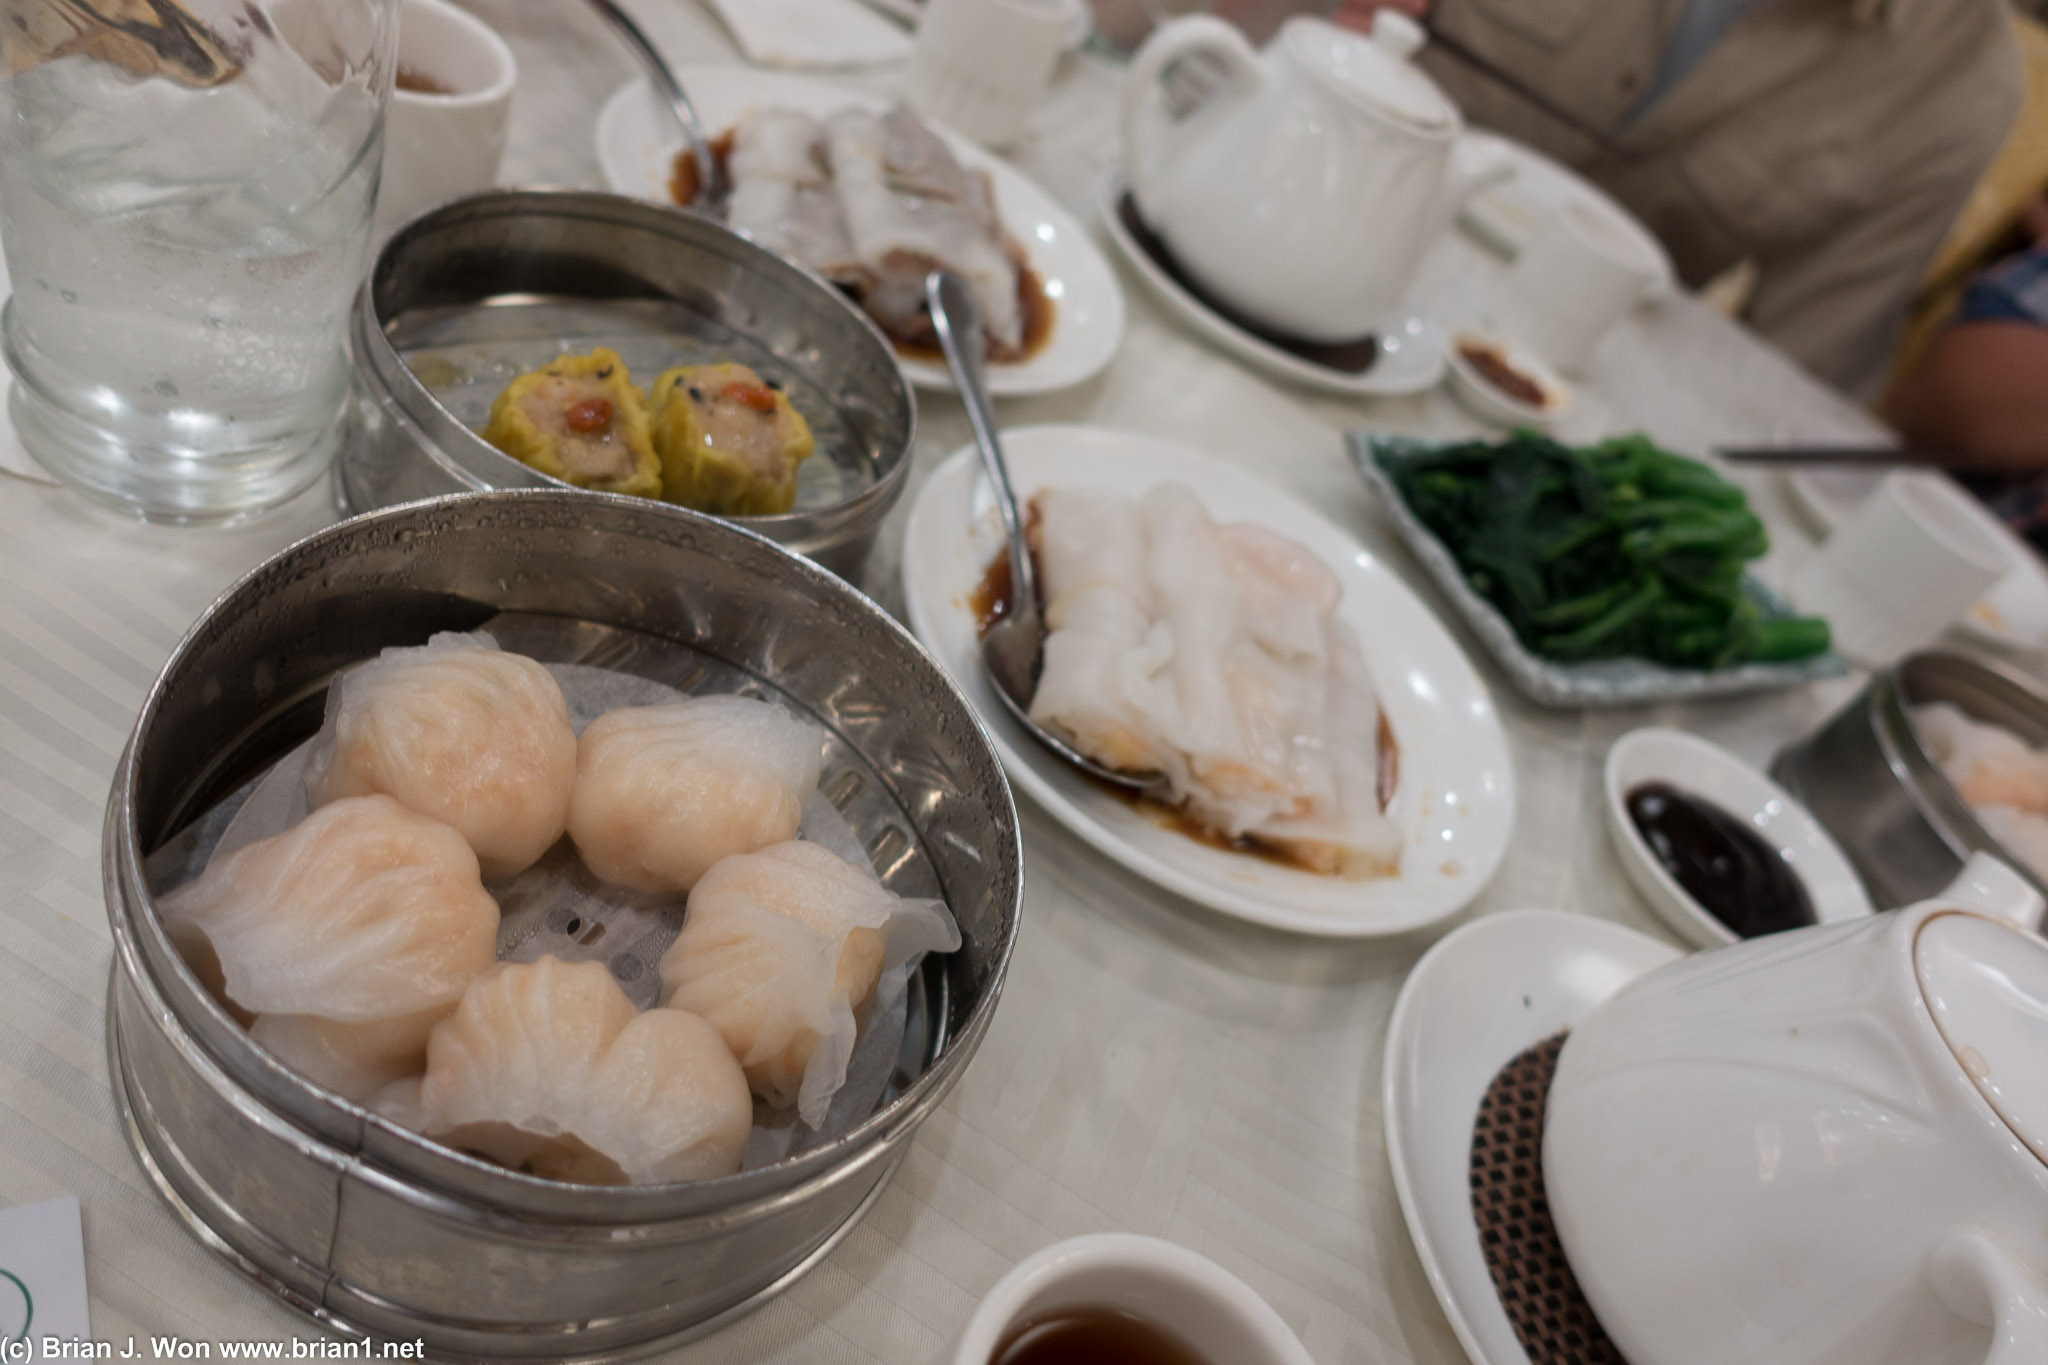 Some much prettier har gow. And some har chueng fun (skins always too thick here).